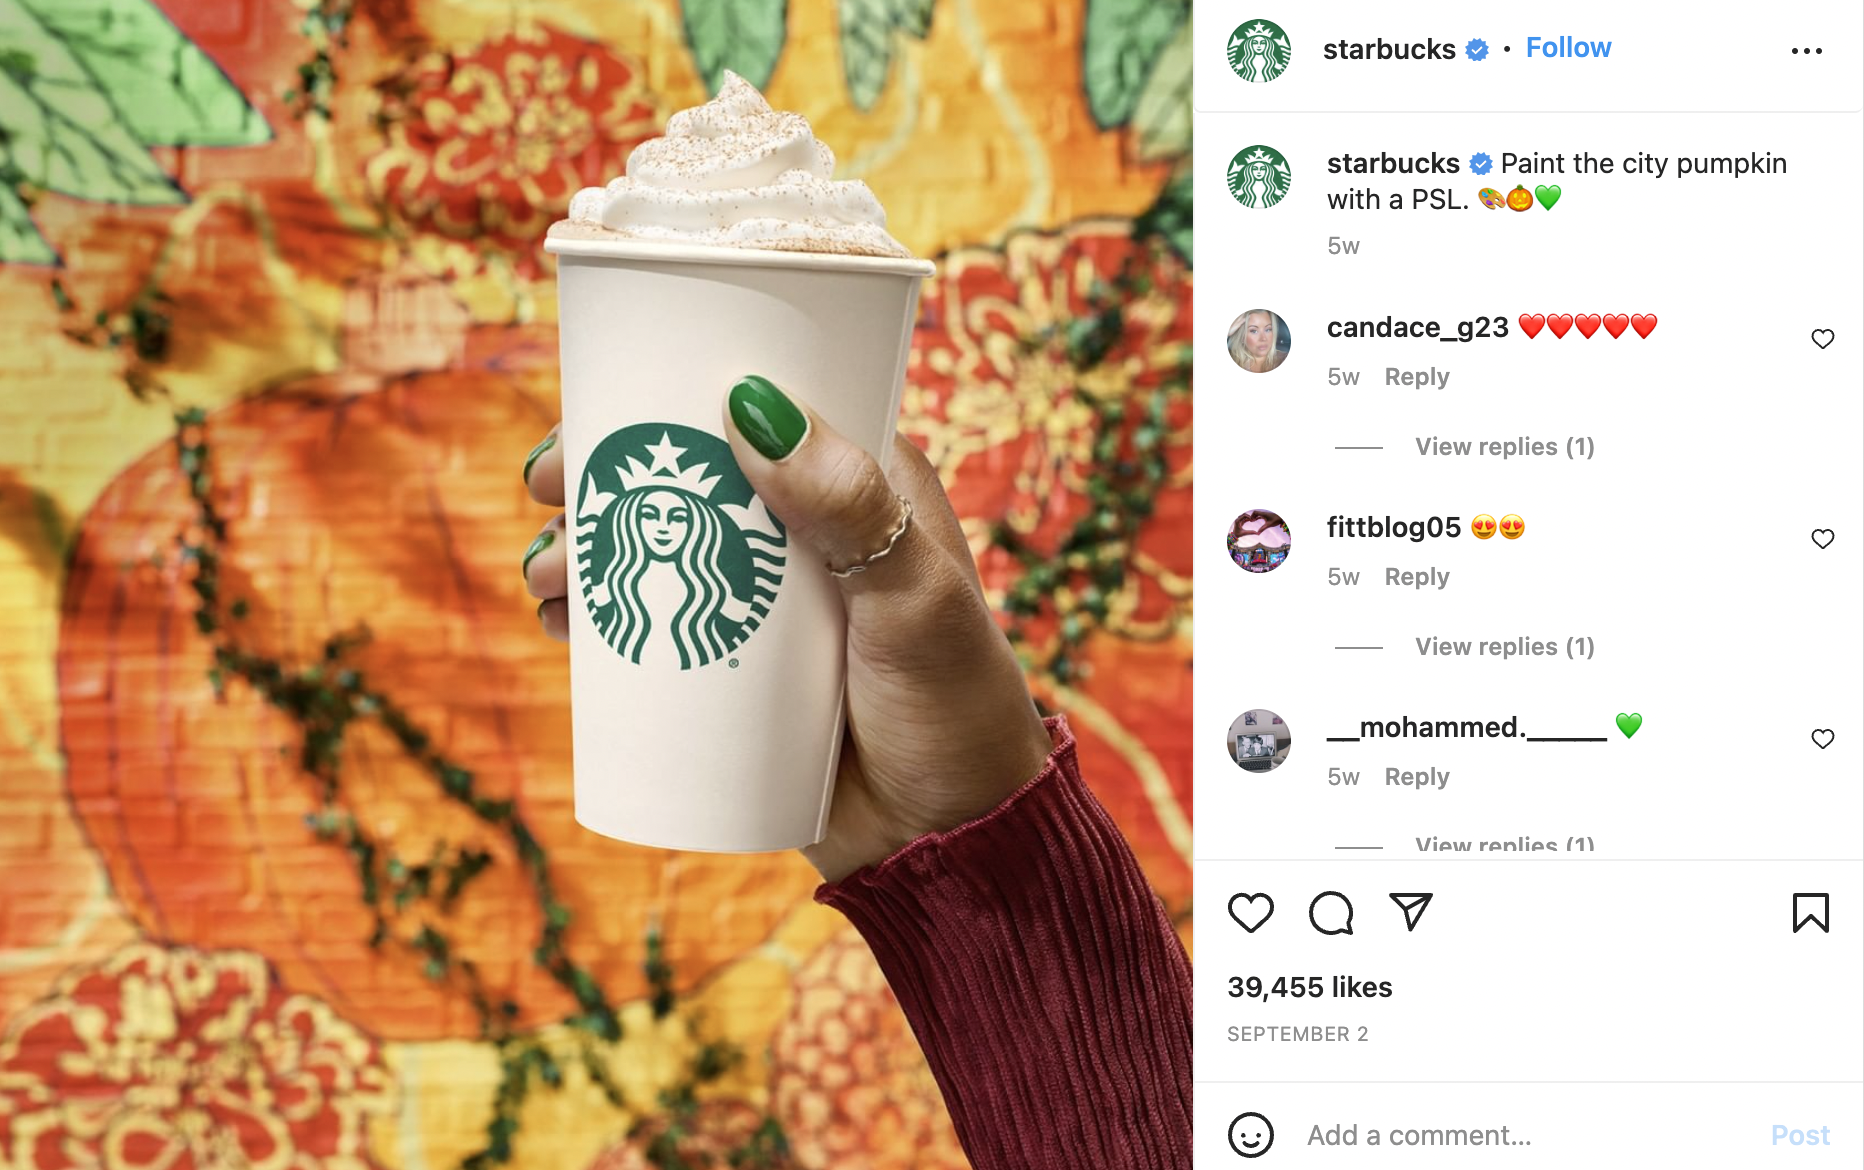 A screenshot with a starbucks post on instagram depicting a PSL